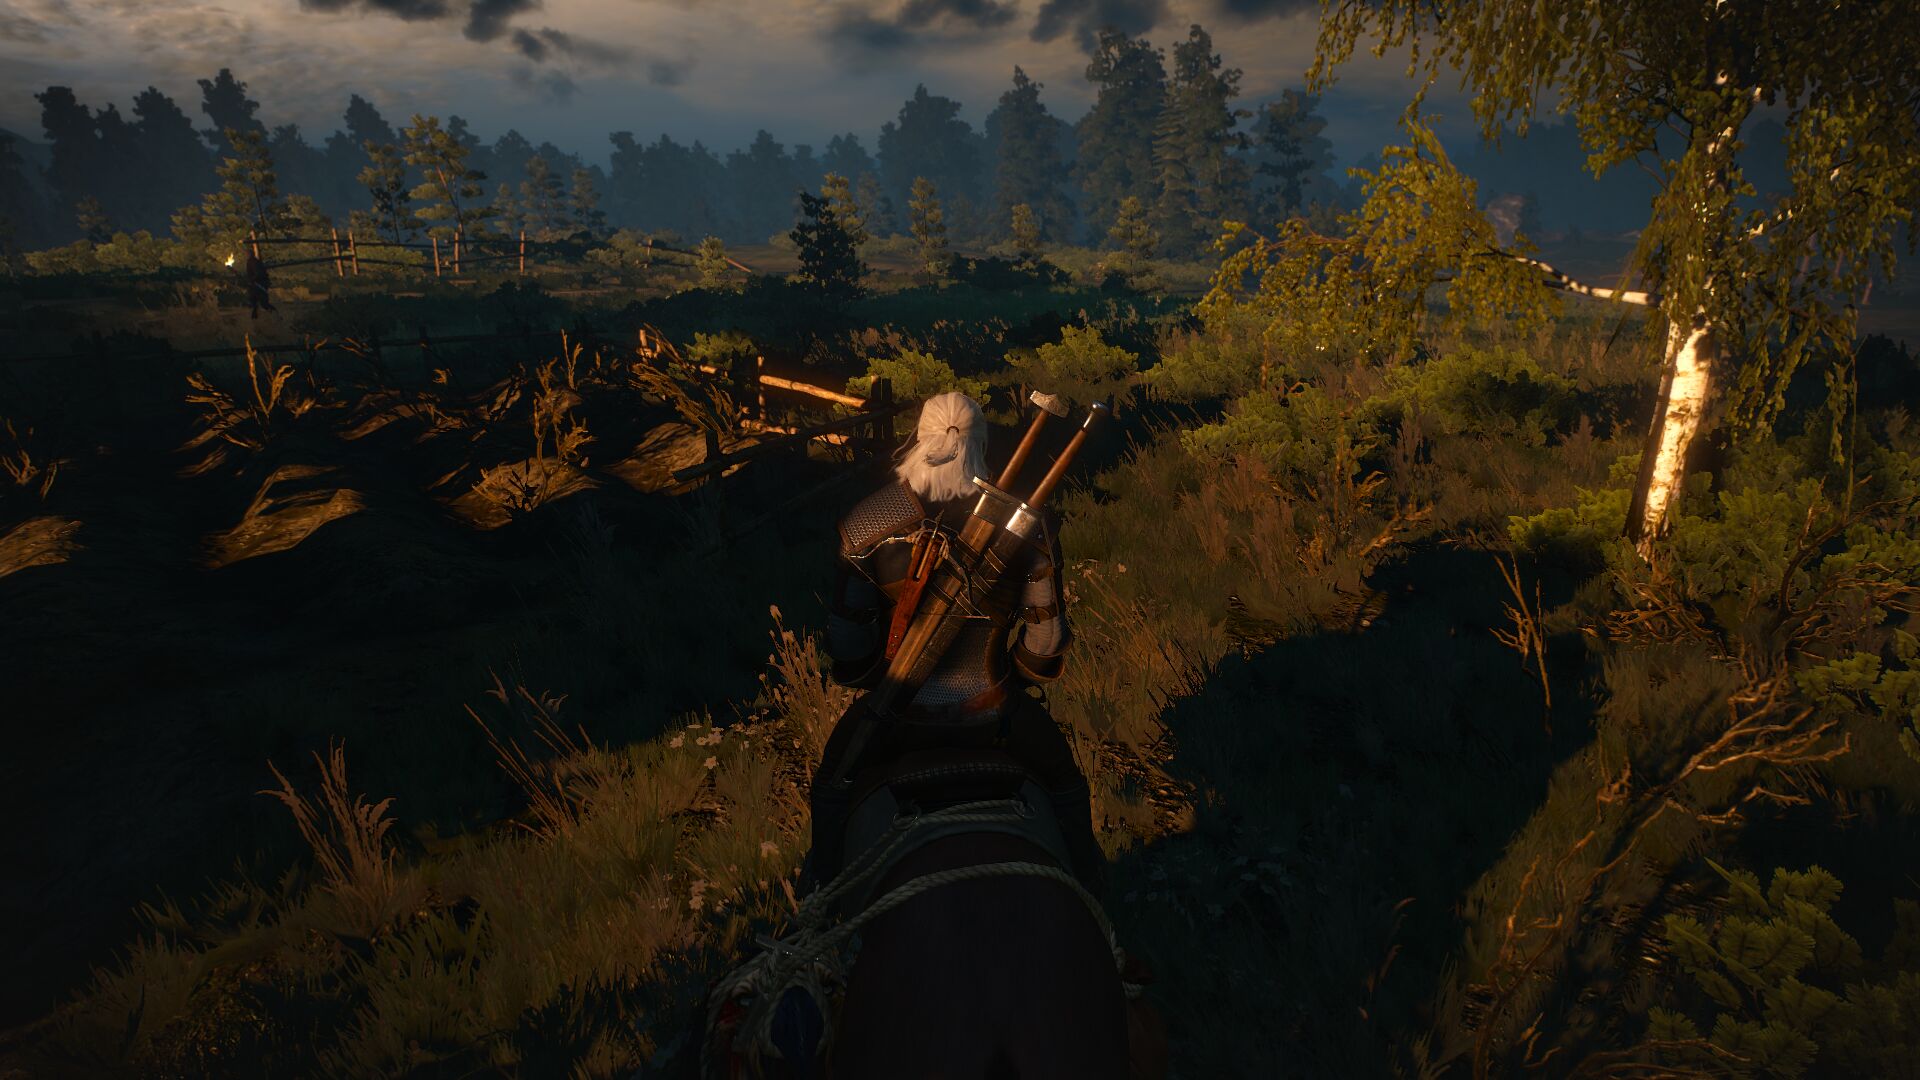 The Longer The Witcher 3 Goes, The Faster I Move Through It